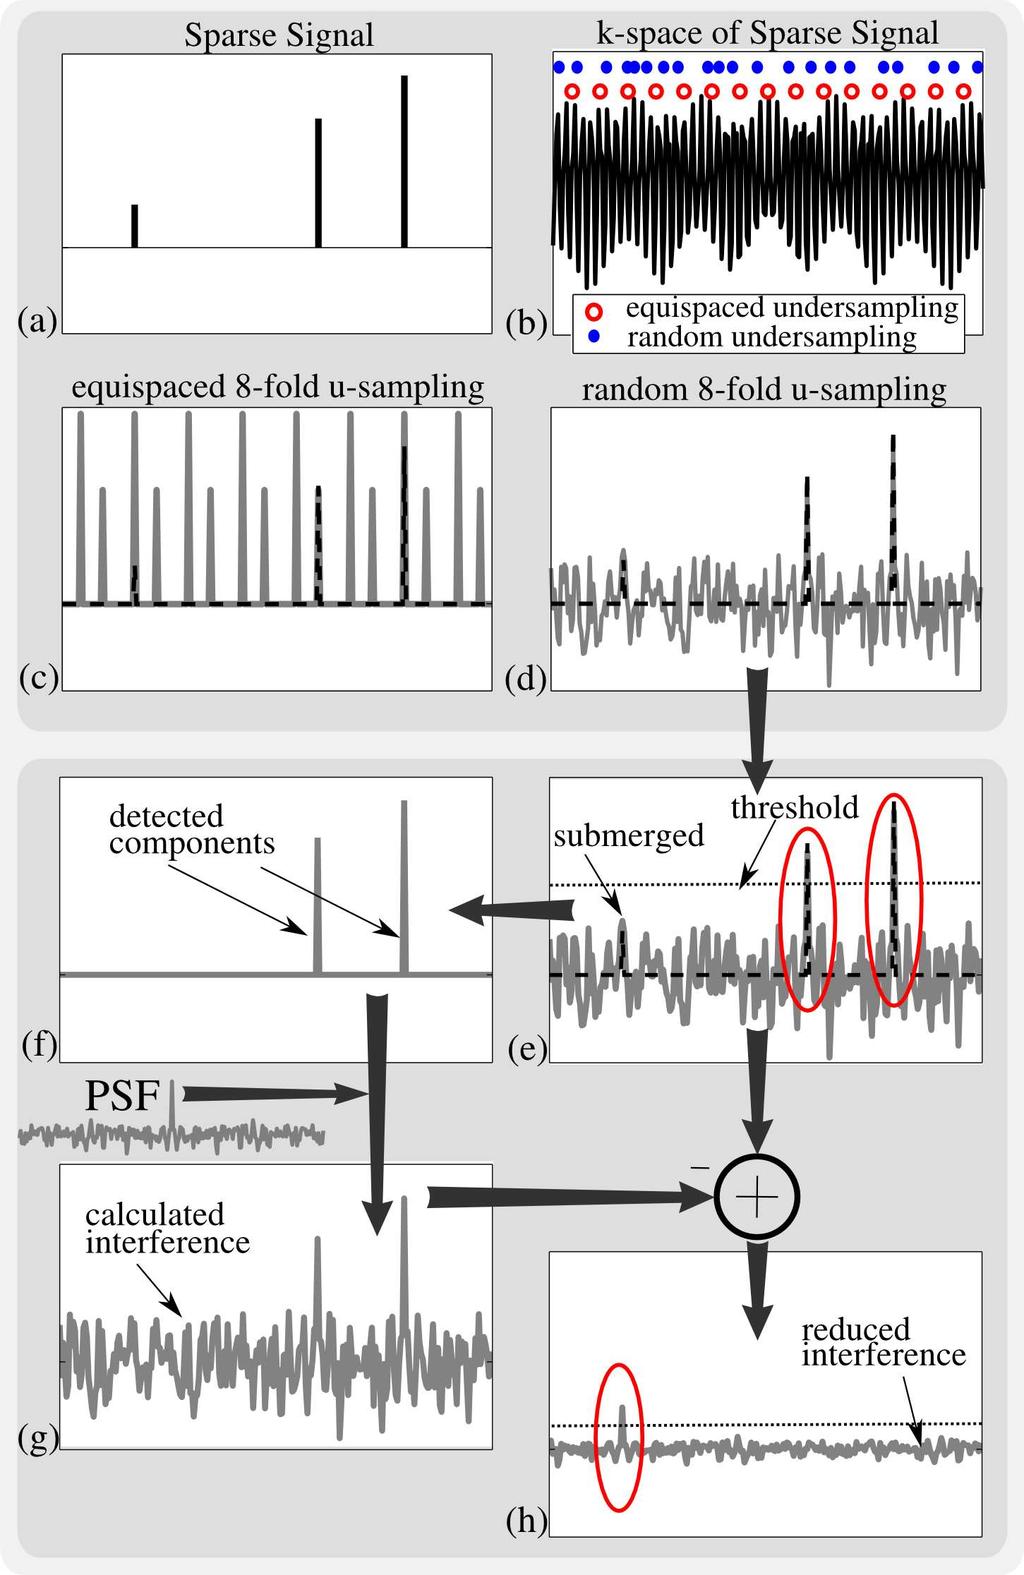 Figure 2: An intuitive reconstruction of a sparse signal from pseudo-random k-space undersampling. A sparse signal (a) is 8-fold undersampled in k-space (b).